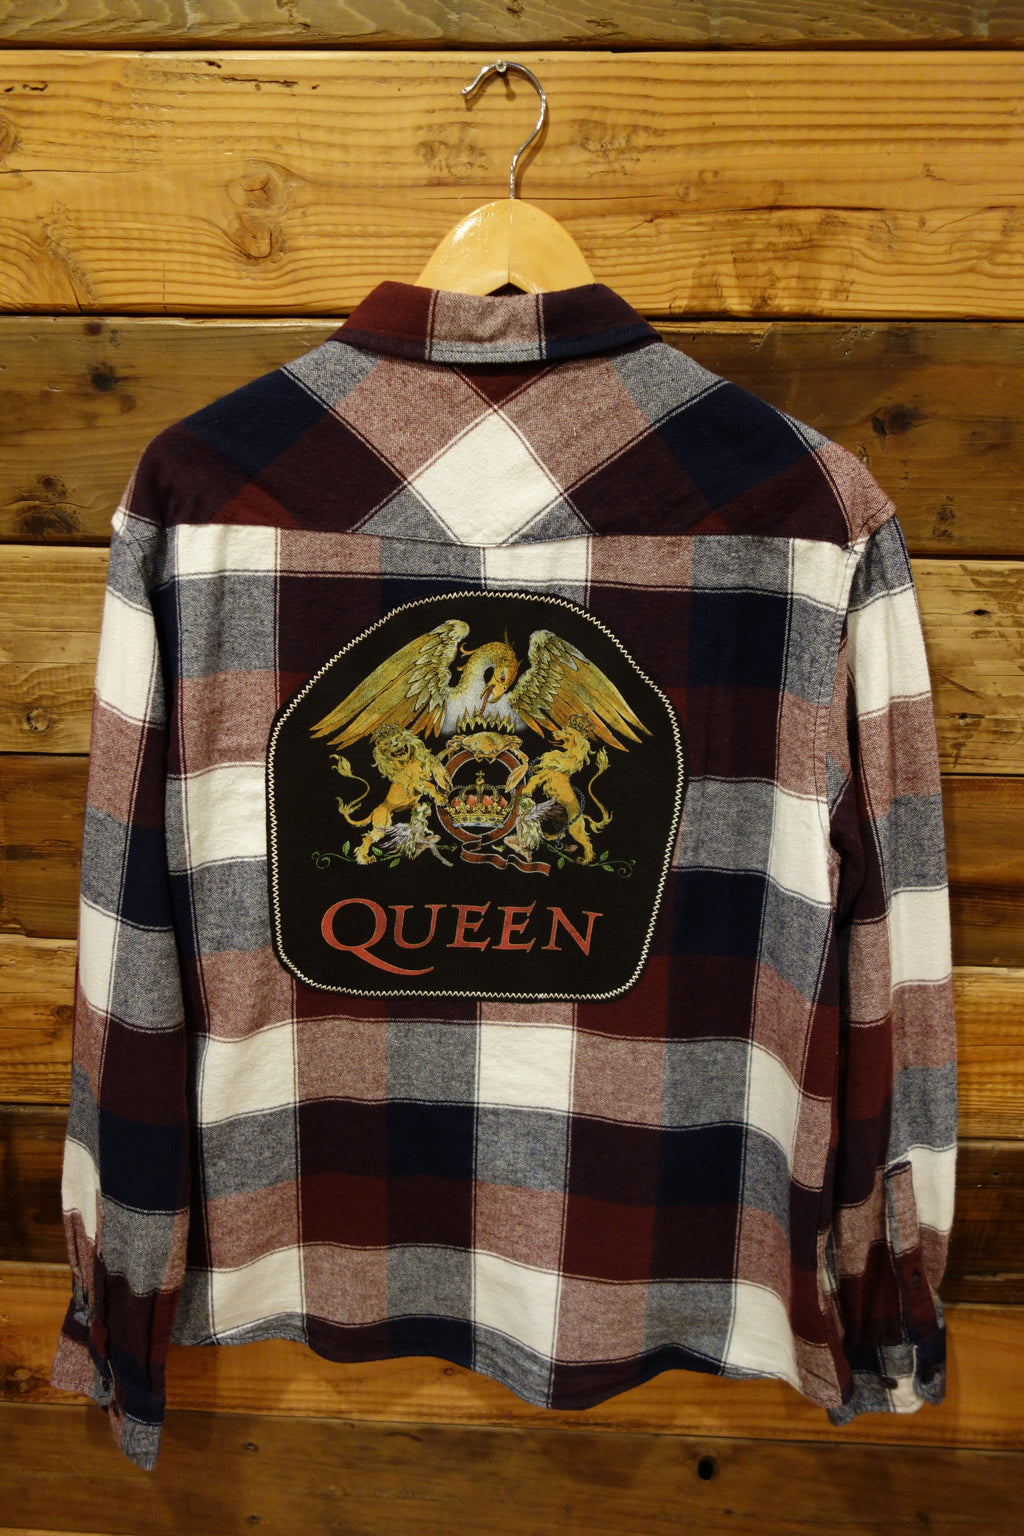 Queen band tee, one-of-a-kind custom Coastal vintage surf flannel